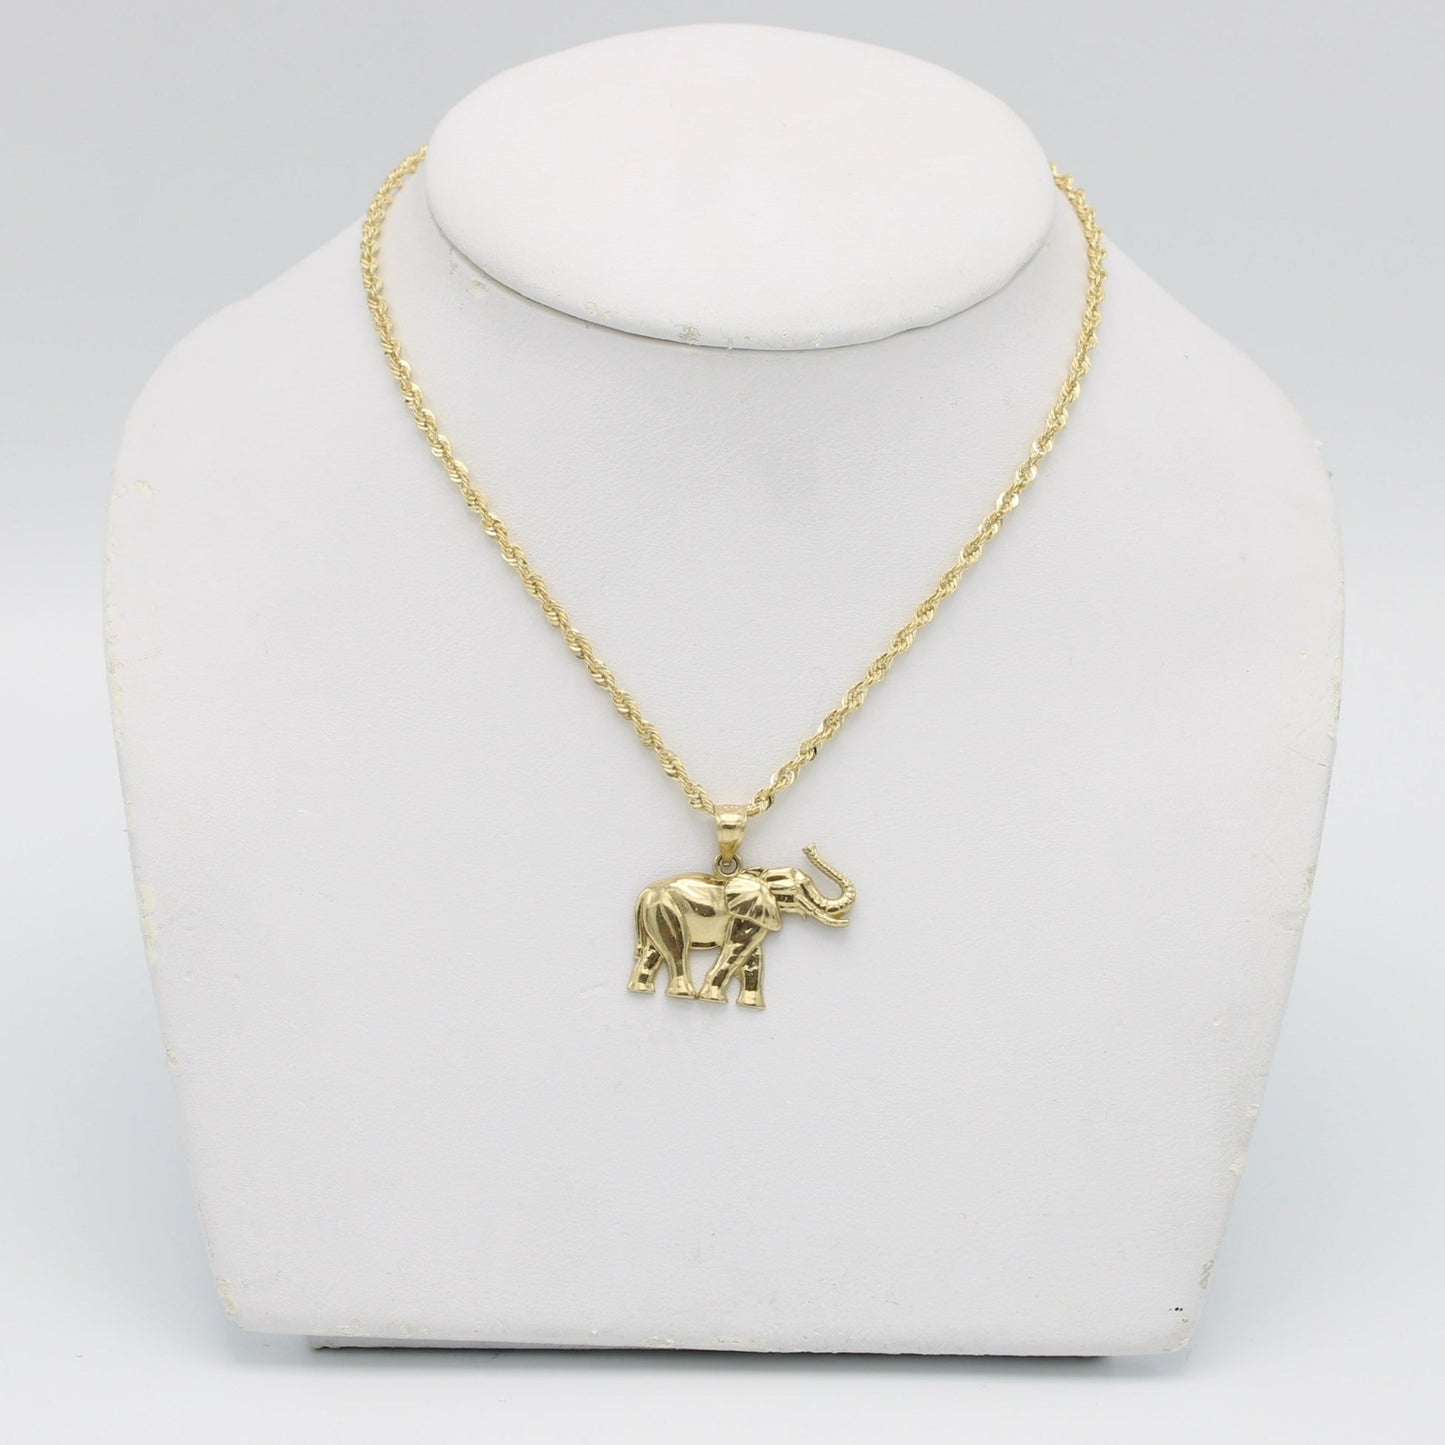 14K Elephan Pendant Cz Stones With Rope Chain Yellow Gold